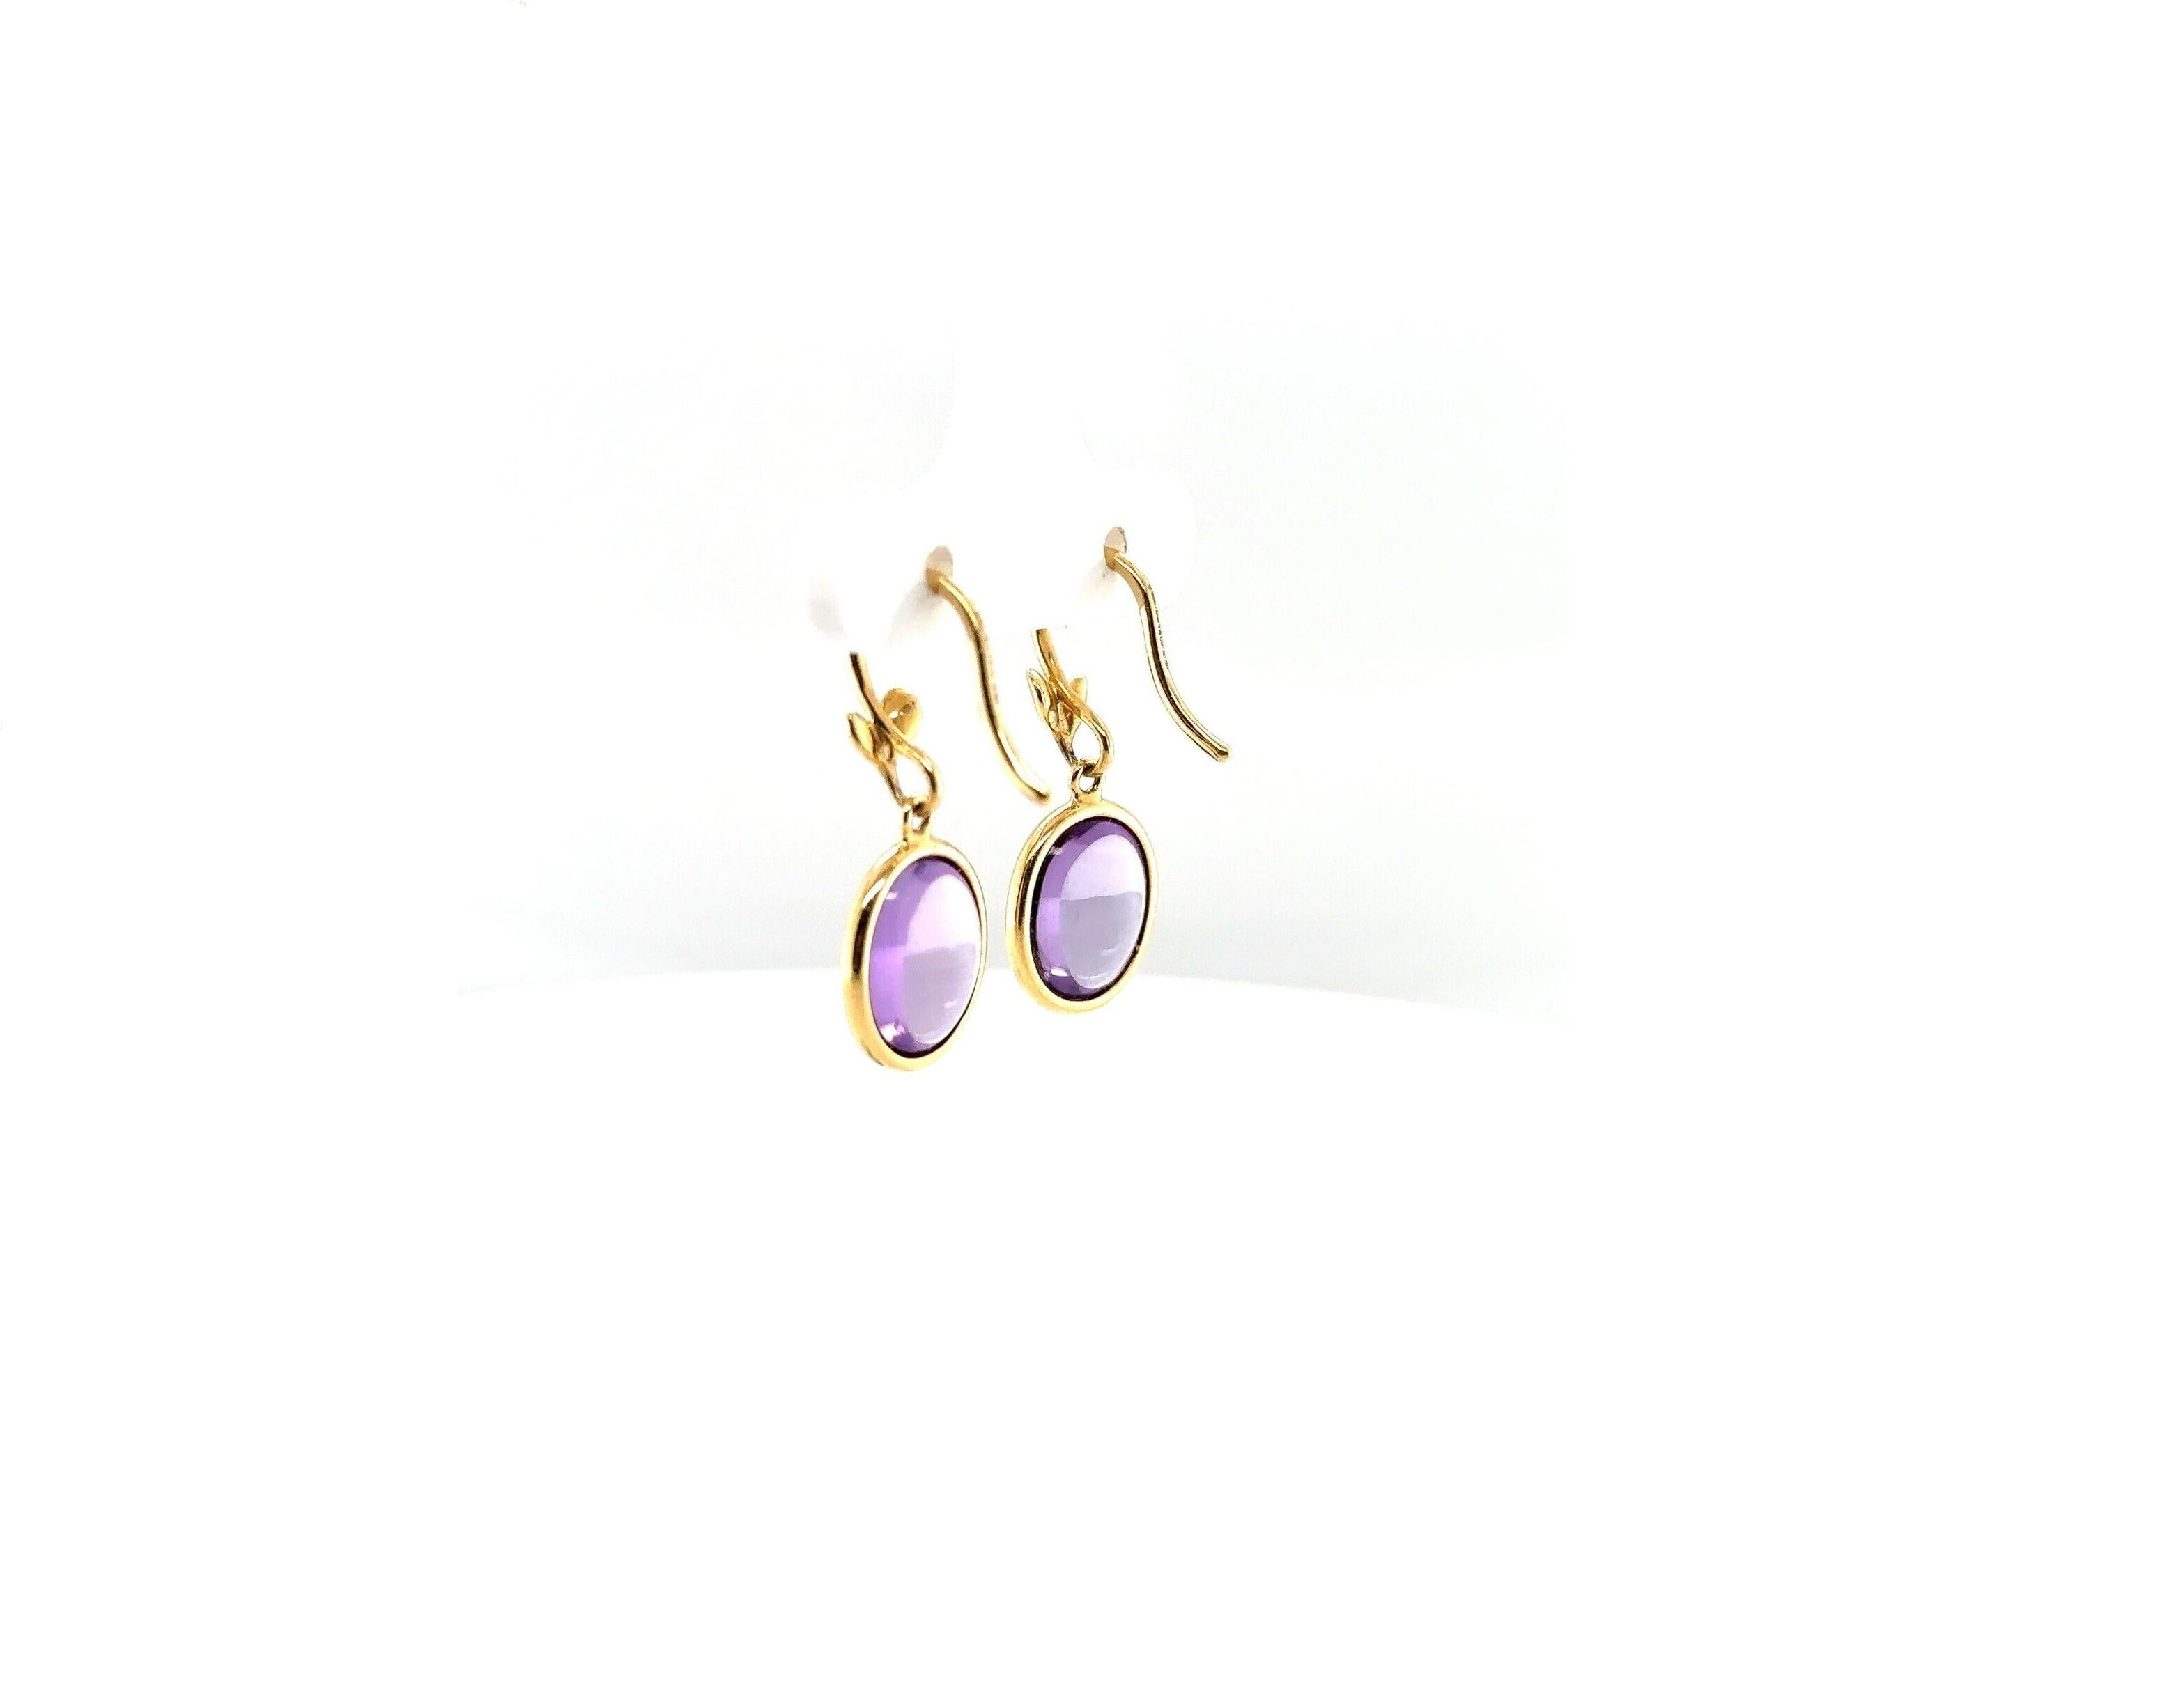 Brand Tiffany & co
Mint condition
Type Earring
Main stone Amethyst
Main stone color purple
Base metal yellow gold
Metal purity 18k
shape oval
Comes with Tiffany & co original box
